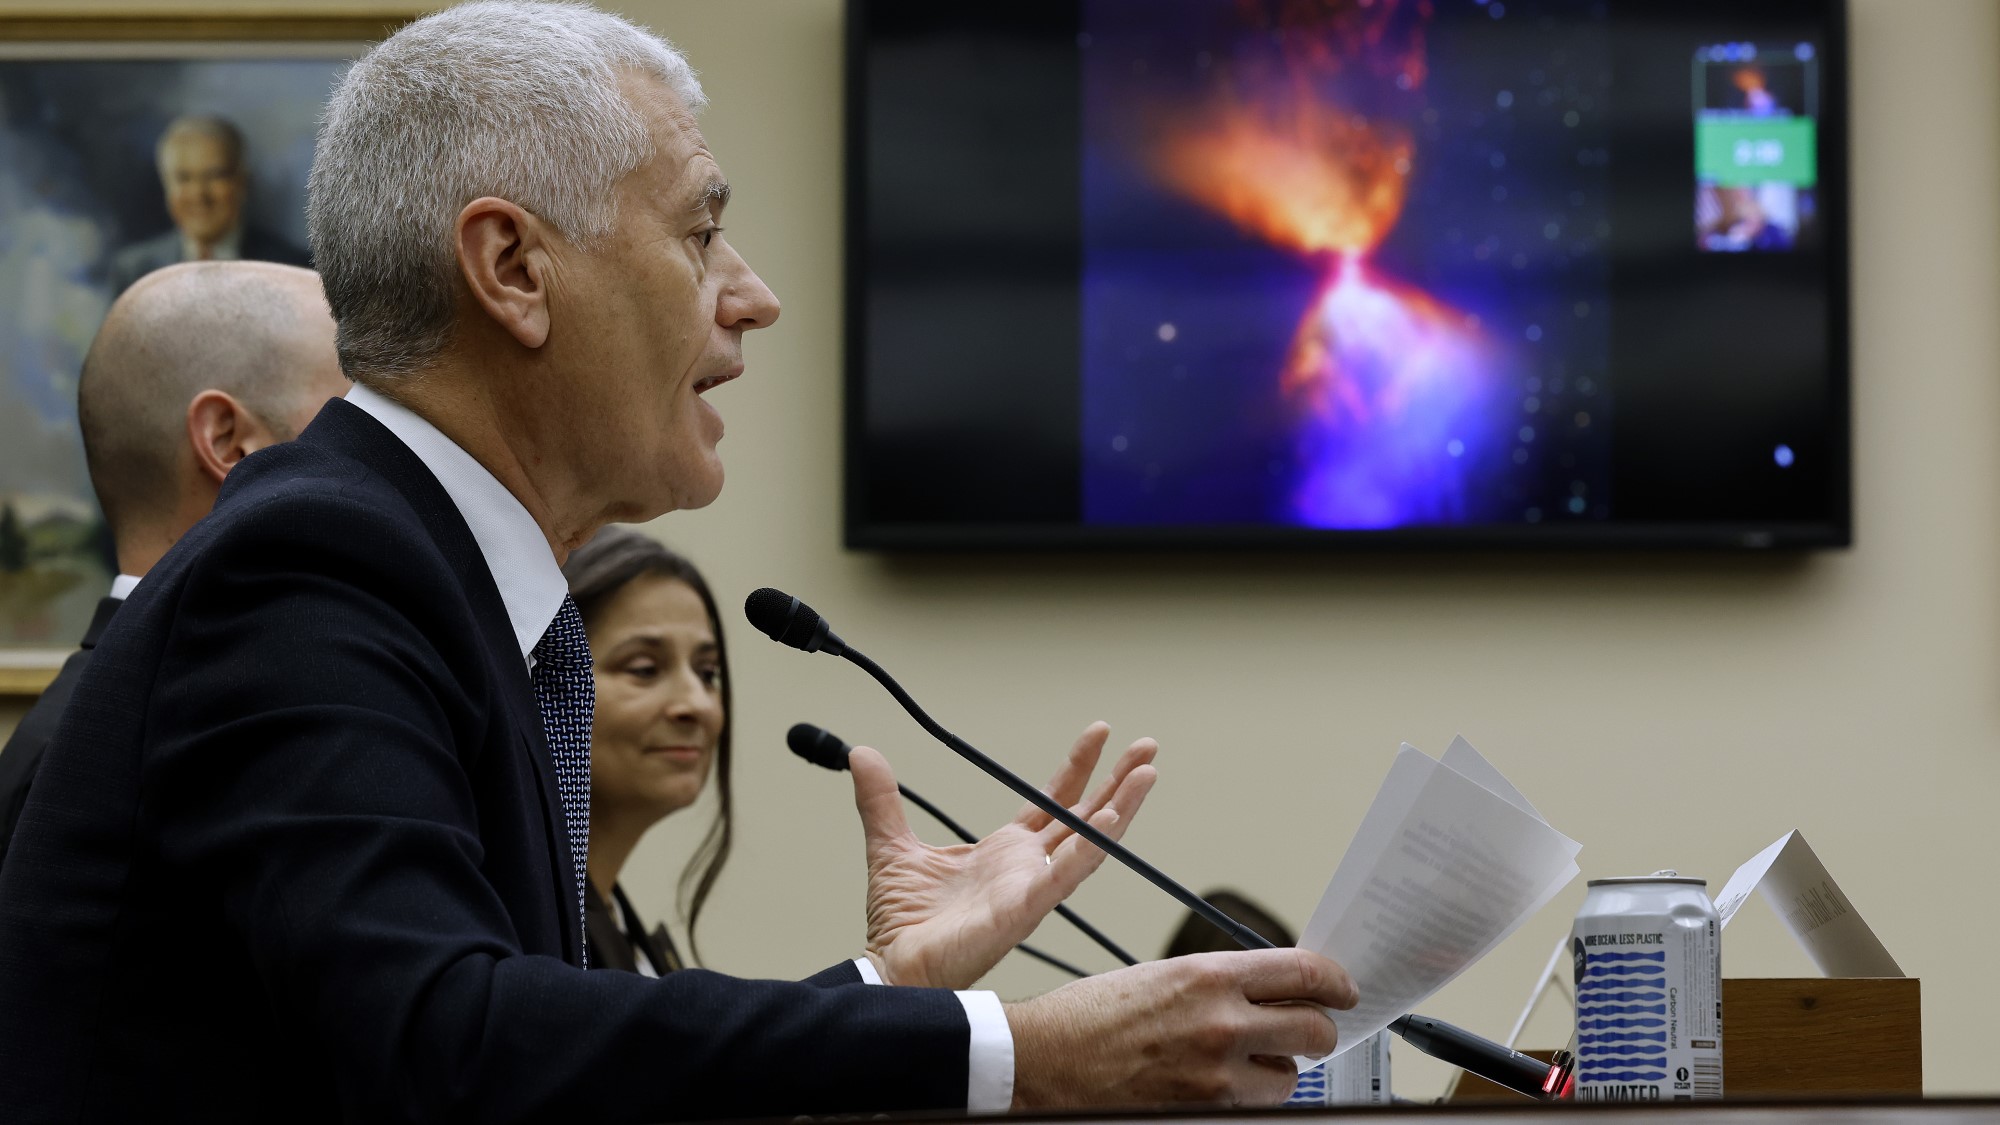 James Webb Space Telescope's early science thrills US lawmakers in Congress